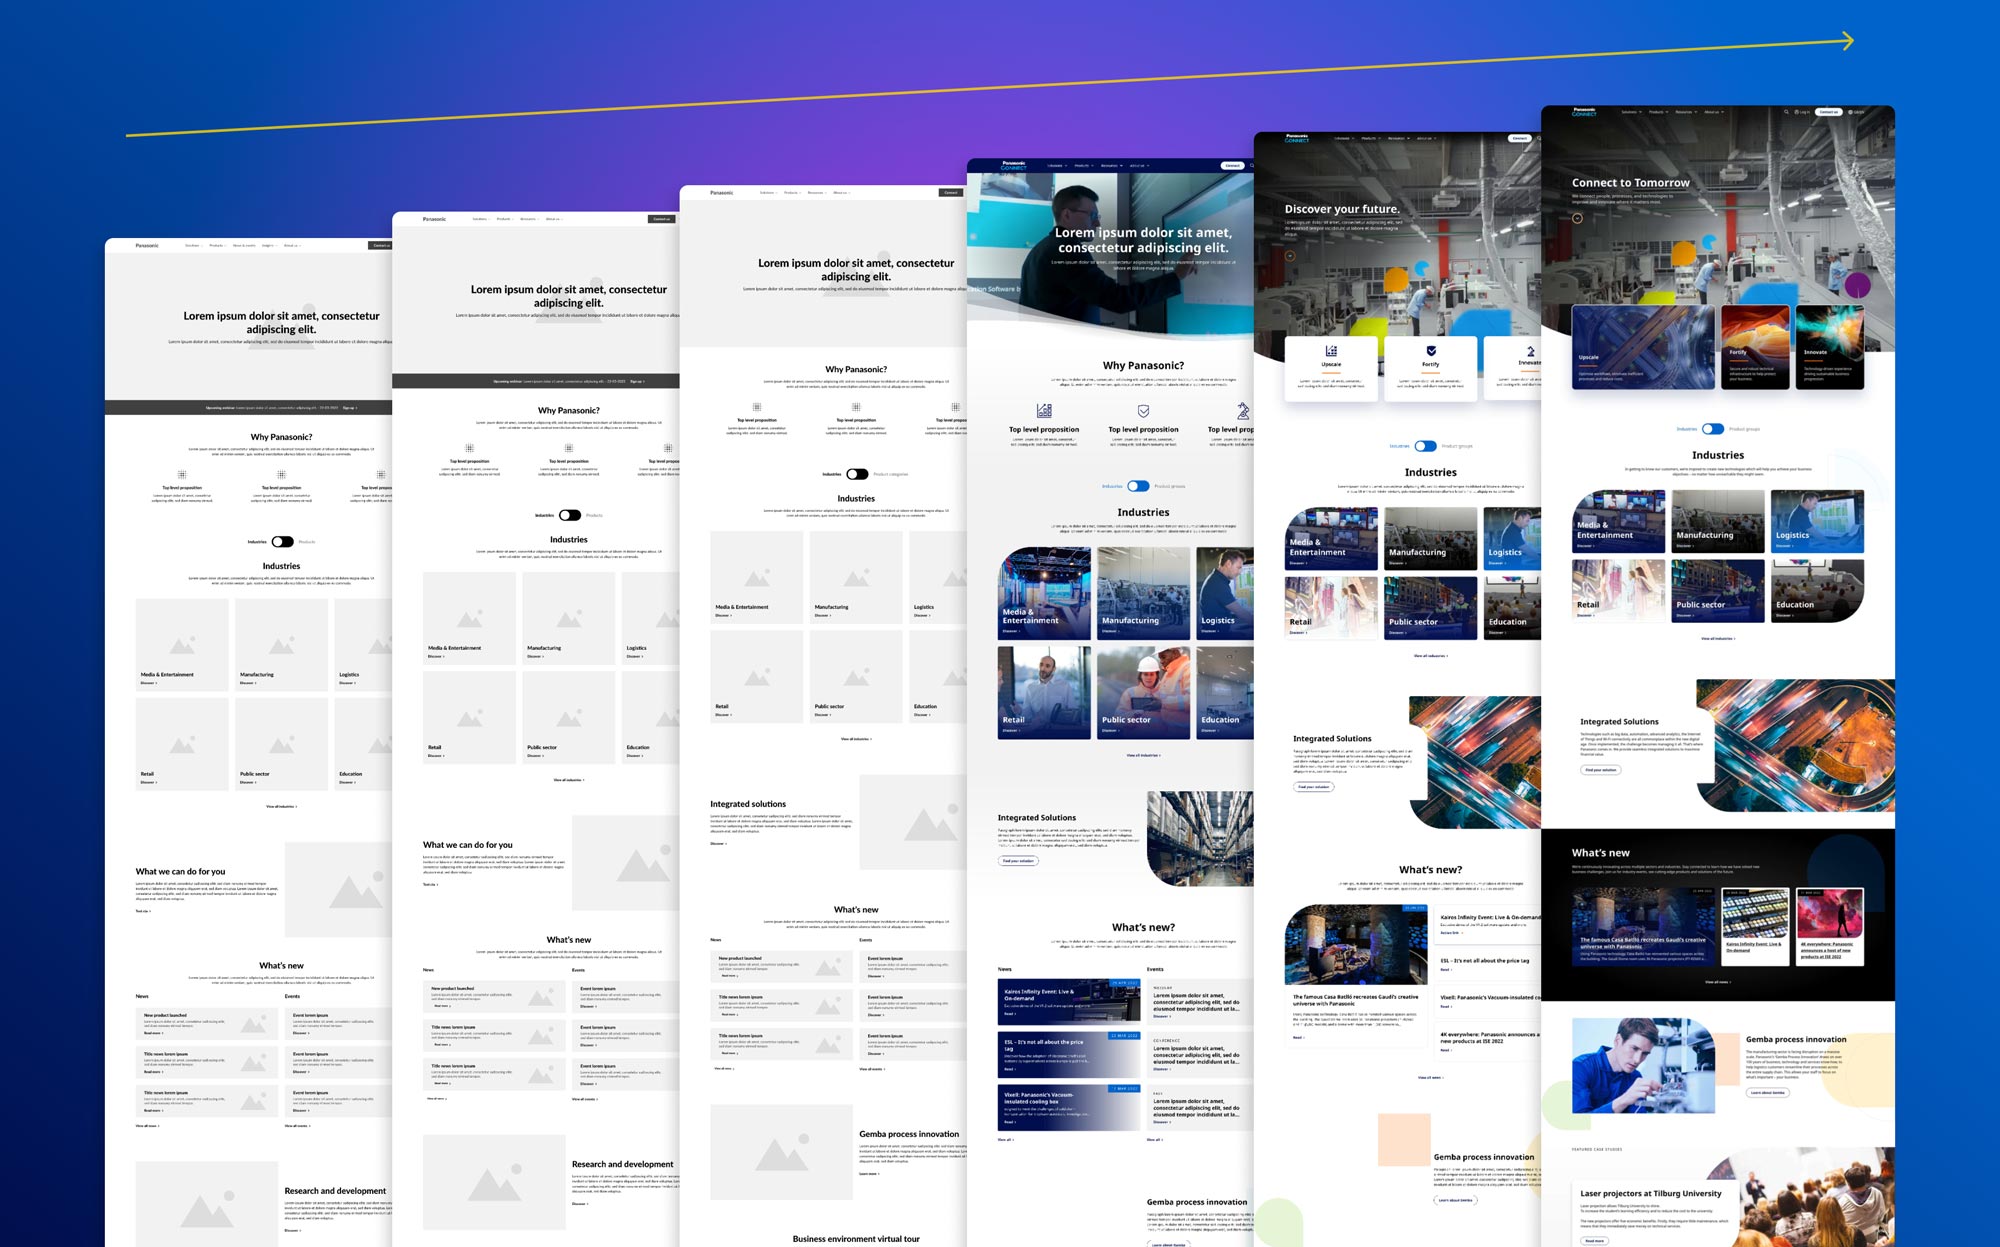 An evolution of the Panasonic Connect Europe website homepage, from wireframe to UI